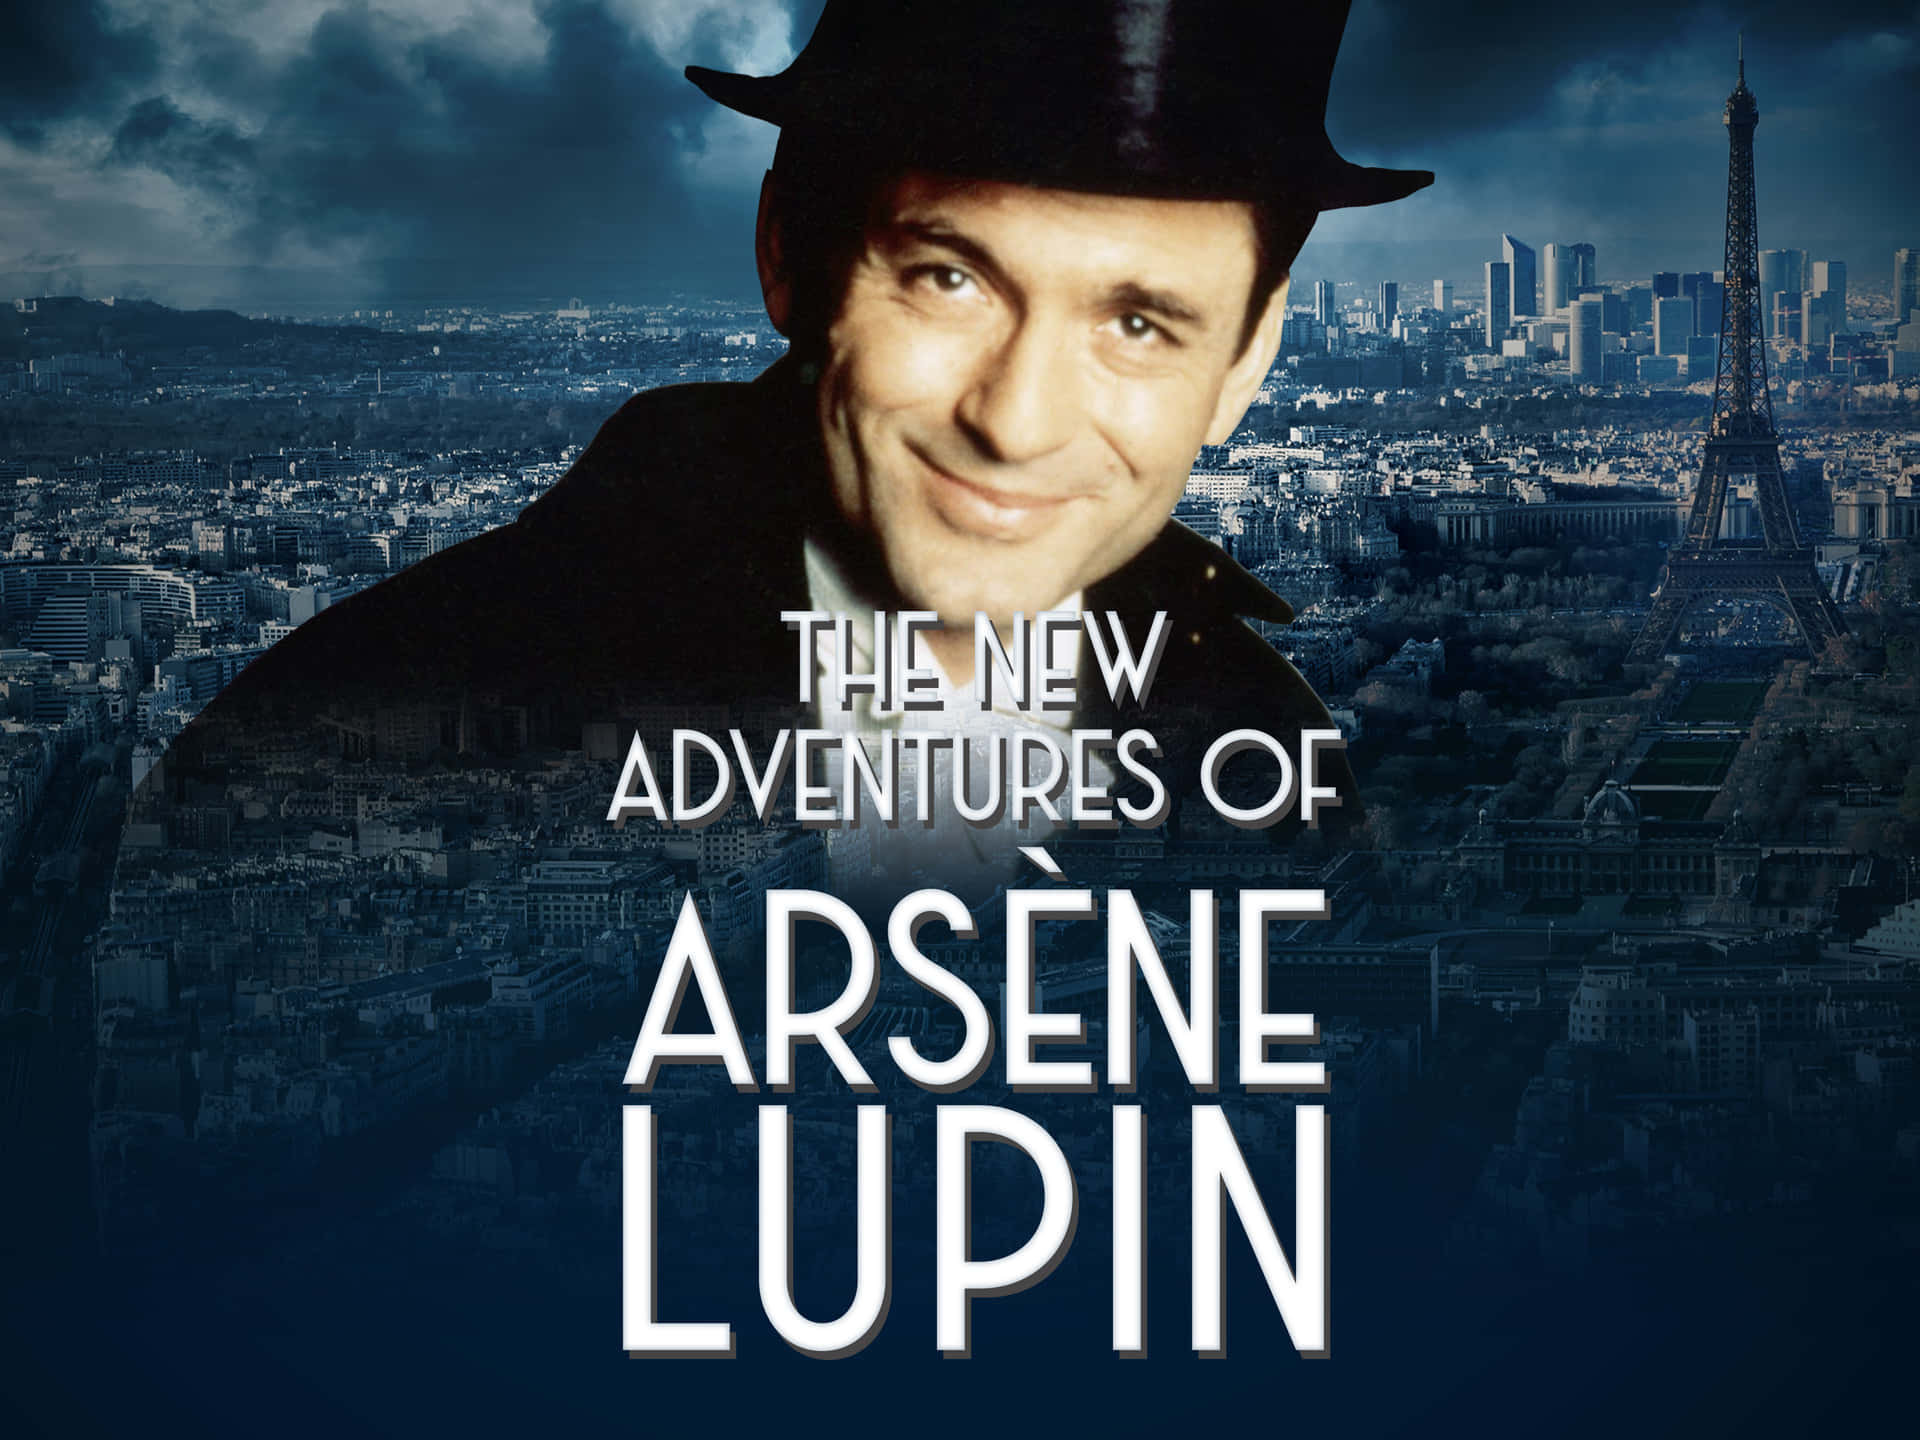 Arsène Lupin, The Master Thief, in Action Wallpaper